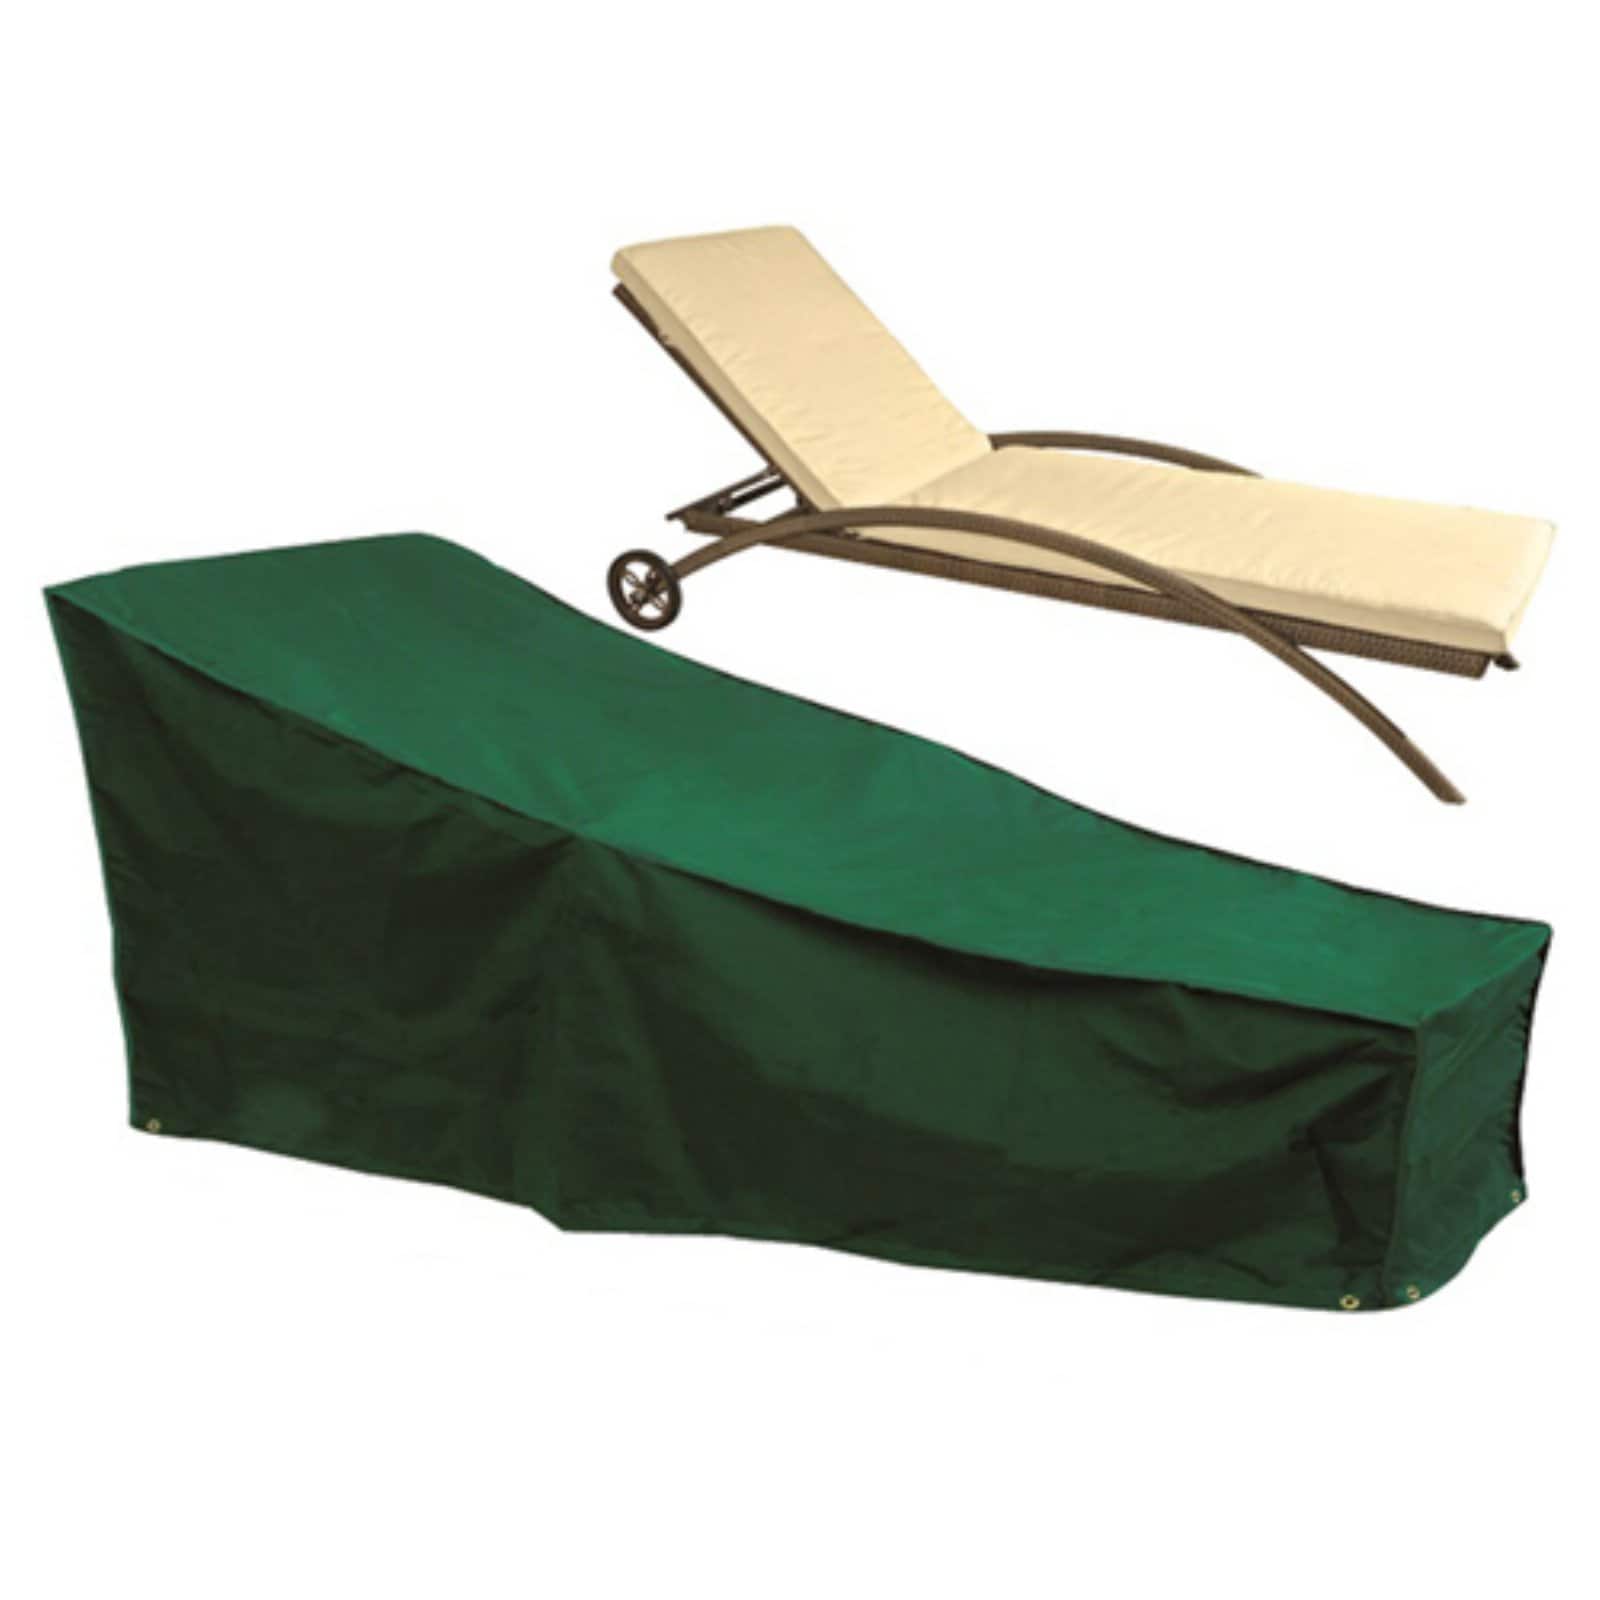 Bosmere Waterproof Green 87 in. Lounge Sunbed Cover - image 1 of 3